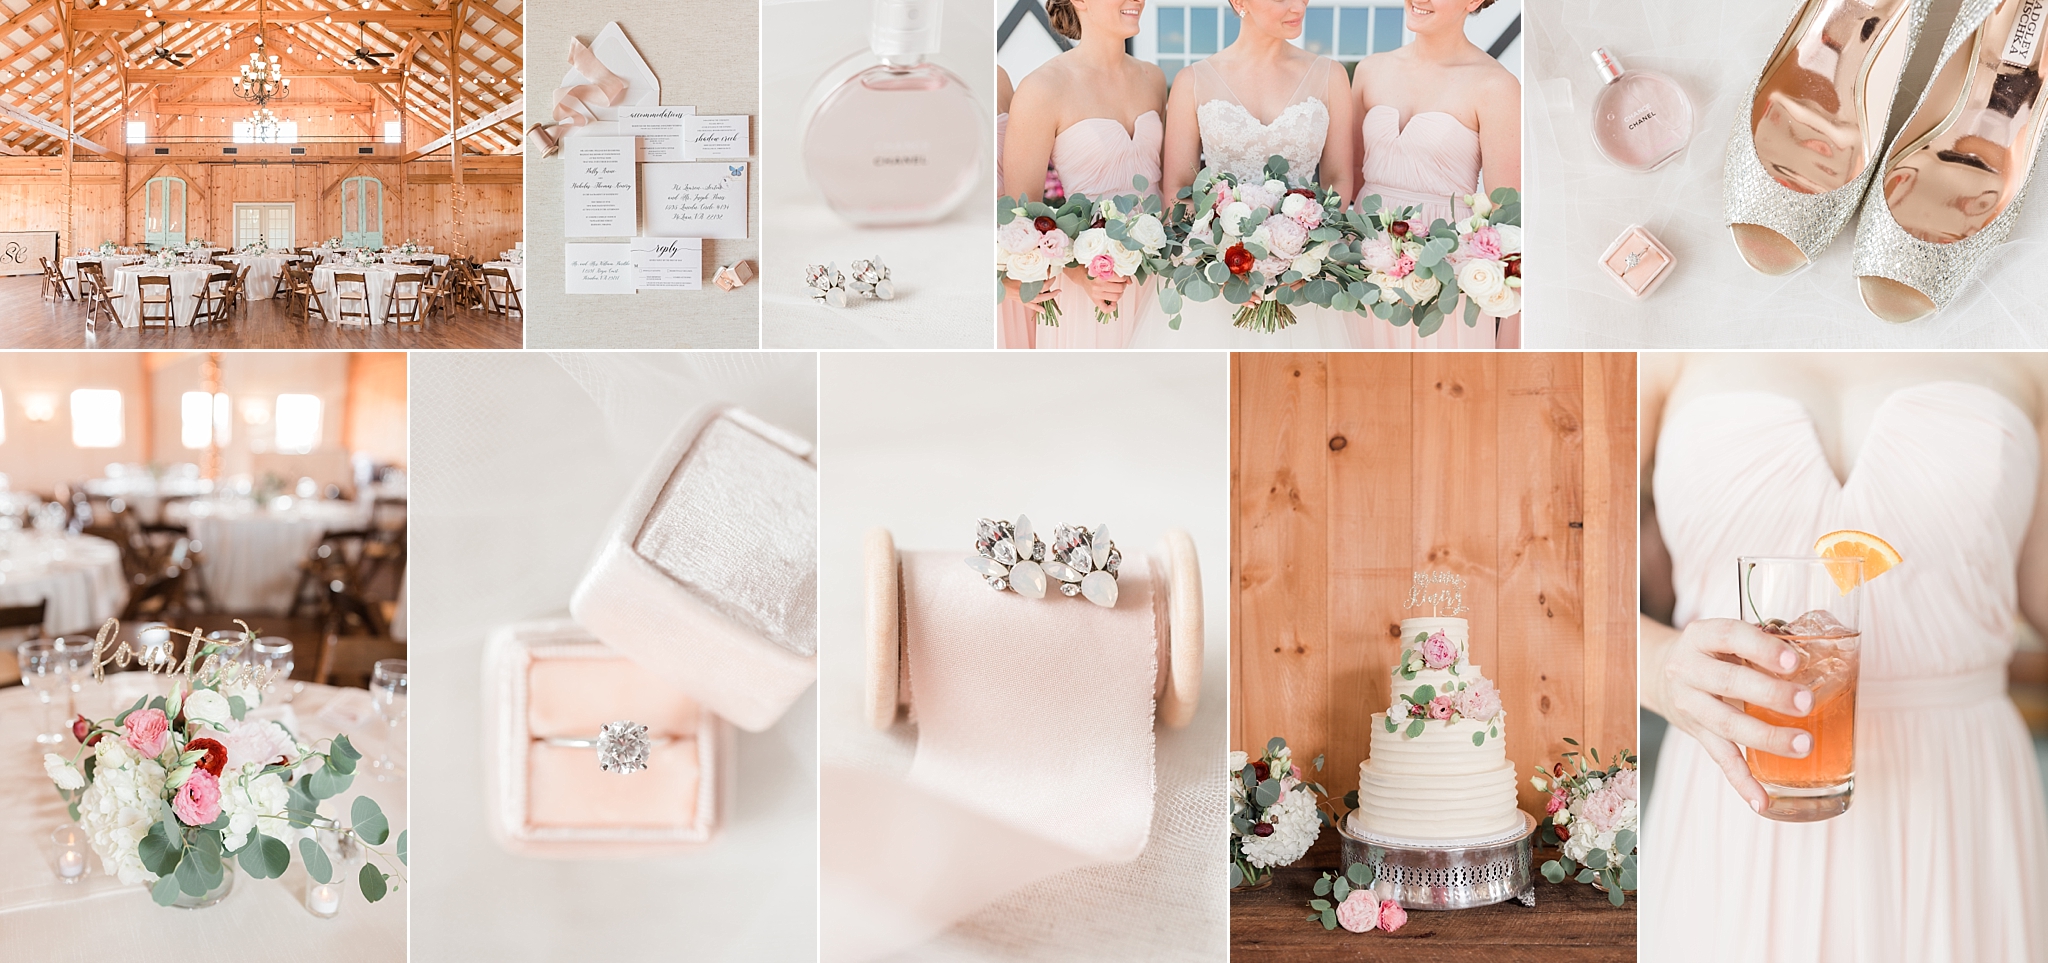 Color combinations are endless! To help narrow the search, this Washington, DC wedding photographer is sharing 5 things to consider when planning your palette.